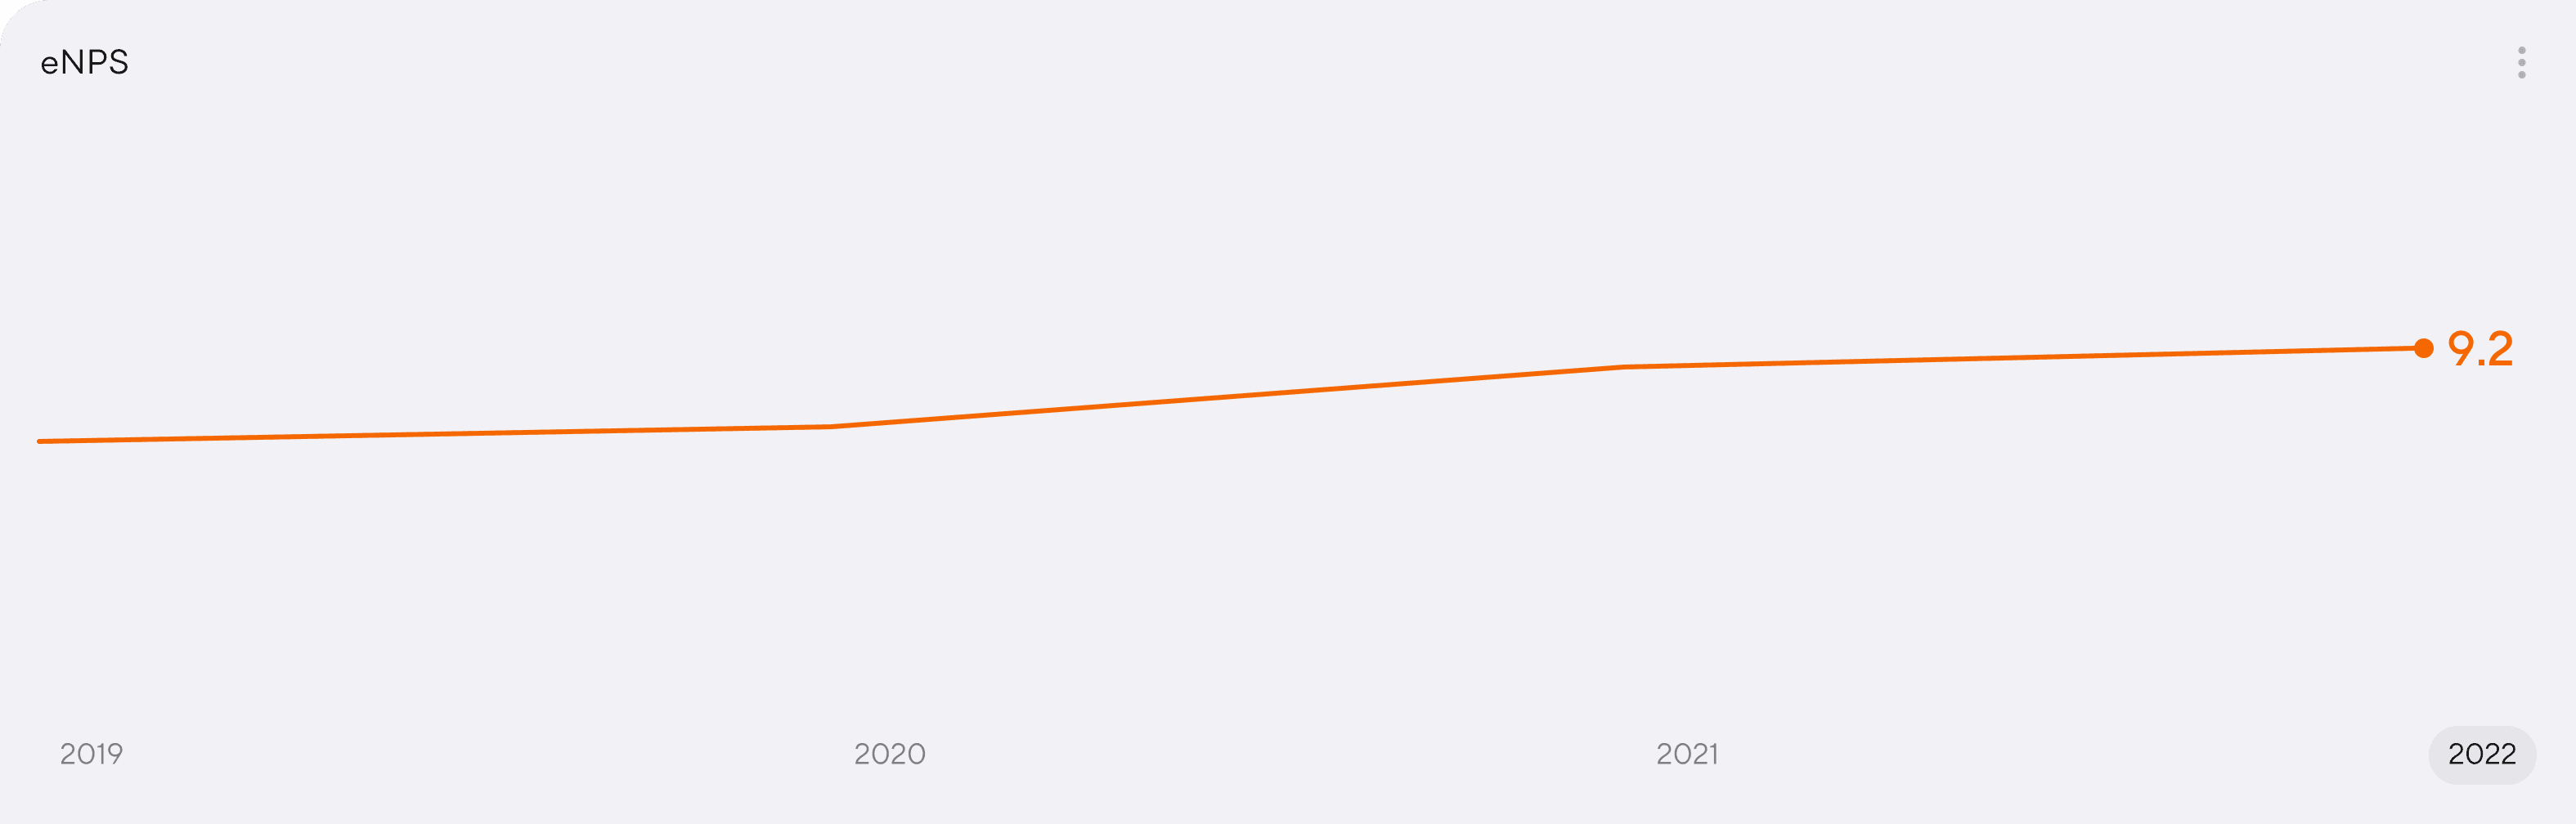 Line graph titled eNPS showing data from 2019 through 2022, where the value is 9.2.